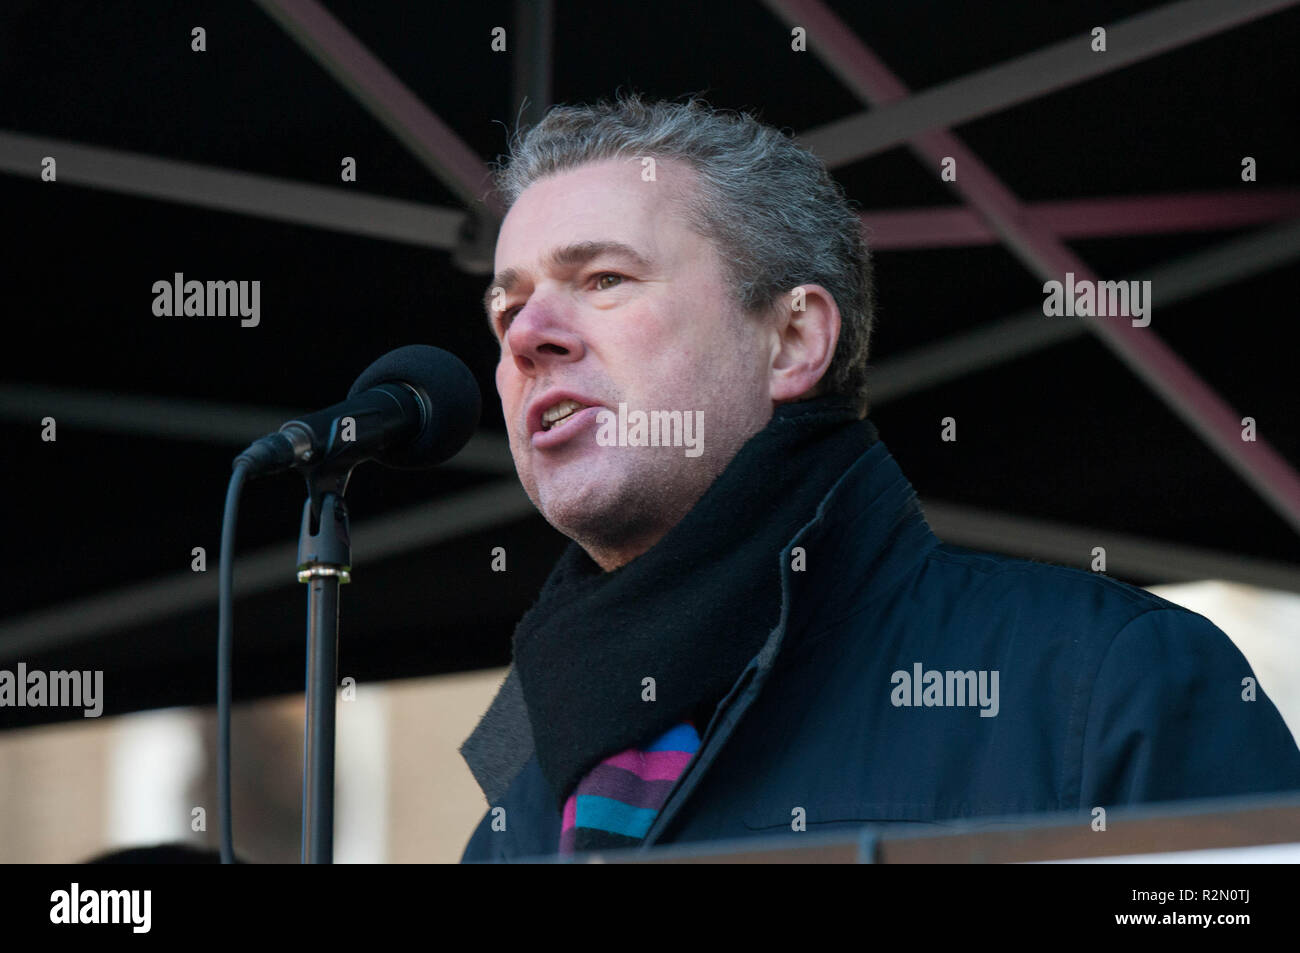 General Secretary of the Public and Commercial Services Union Mark Serwotka seen speaking during the protest. Huge crowds marched from the BBC in Portland Place to Whitehall with flags and placards during the National Unity Demonstration to oppose the rise of fascist and racist activity in Europe, The demonstration was called by Unite against Fascism, Love Music Hate Racism and Stand up to racism movements. The speeches in Whitehall were disrupted by the presence of a small number of far right activists and Trump supporters. Stock Photo